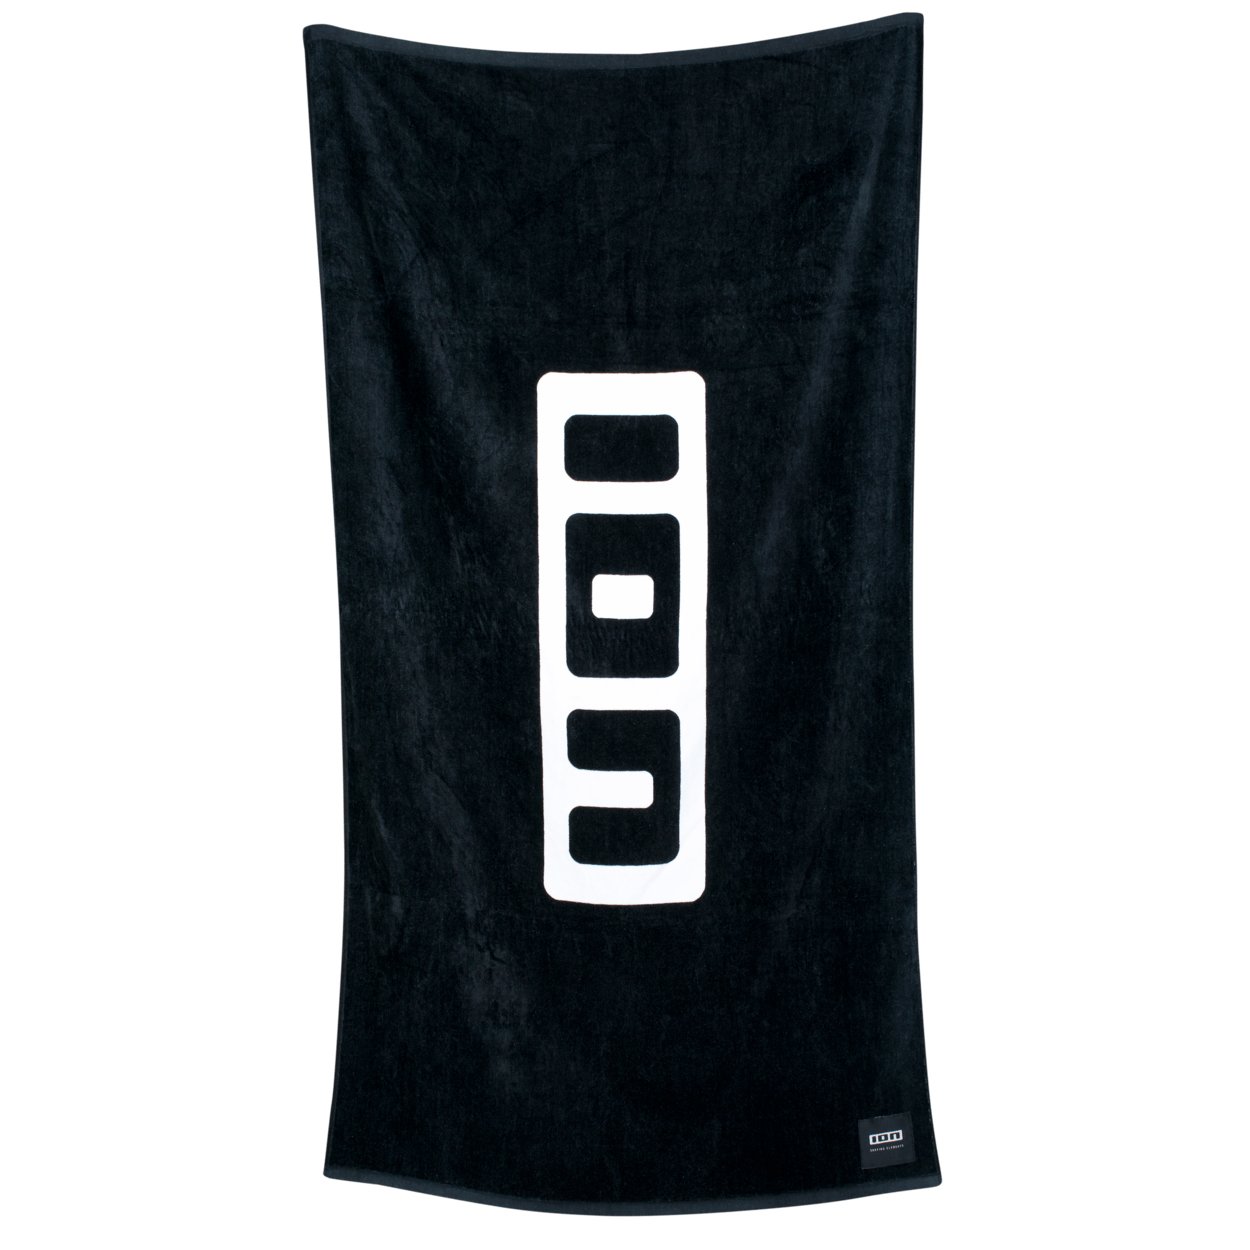 ION Beach Towel 2022 - Worthing Watersports - 9010583059860 - Accessories - ION Water